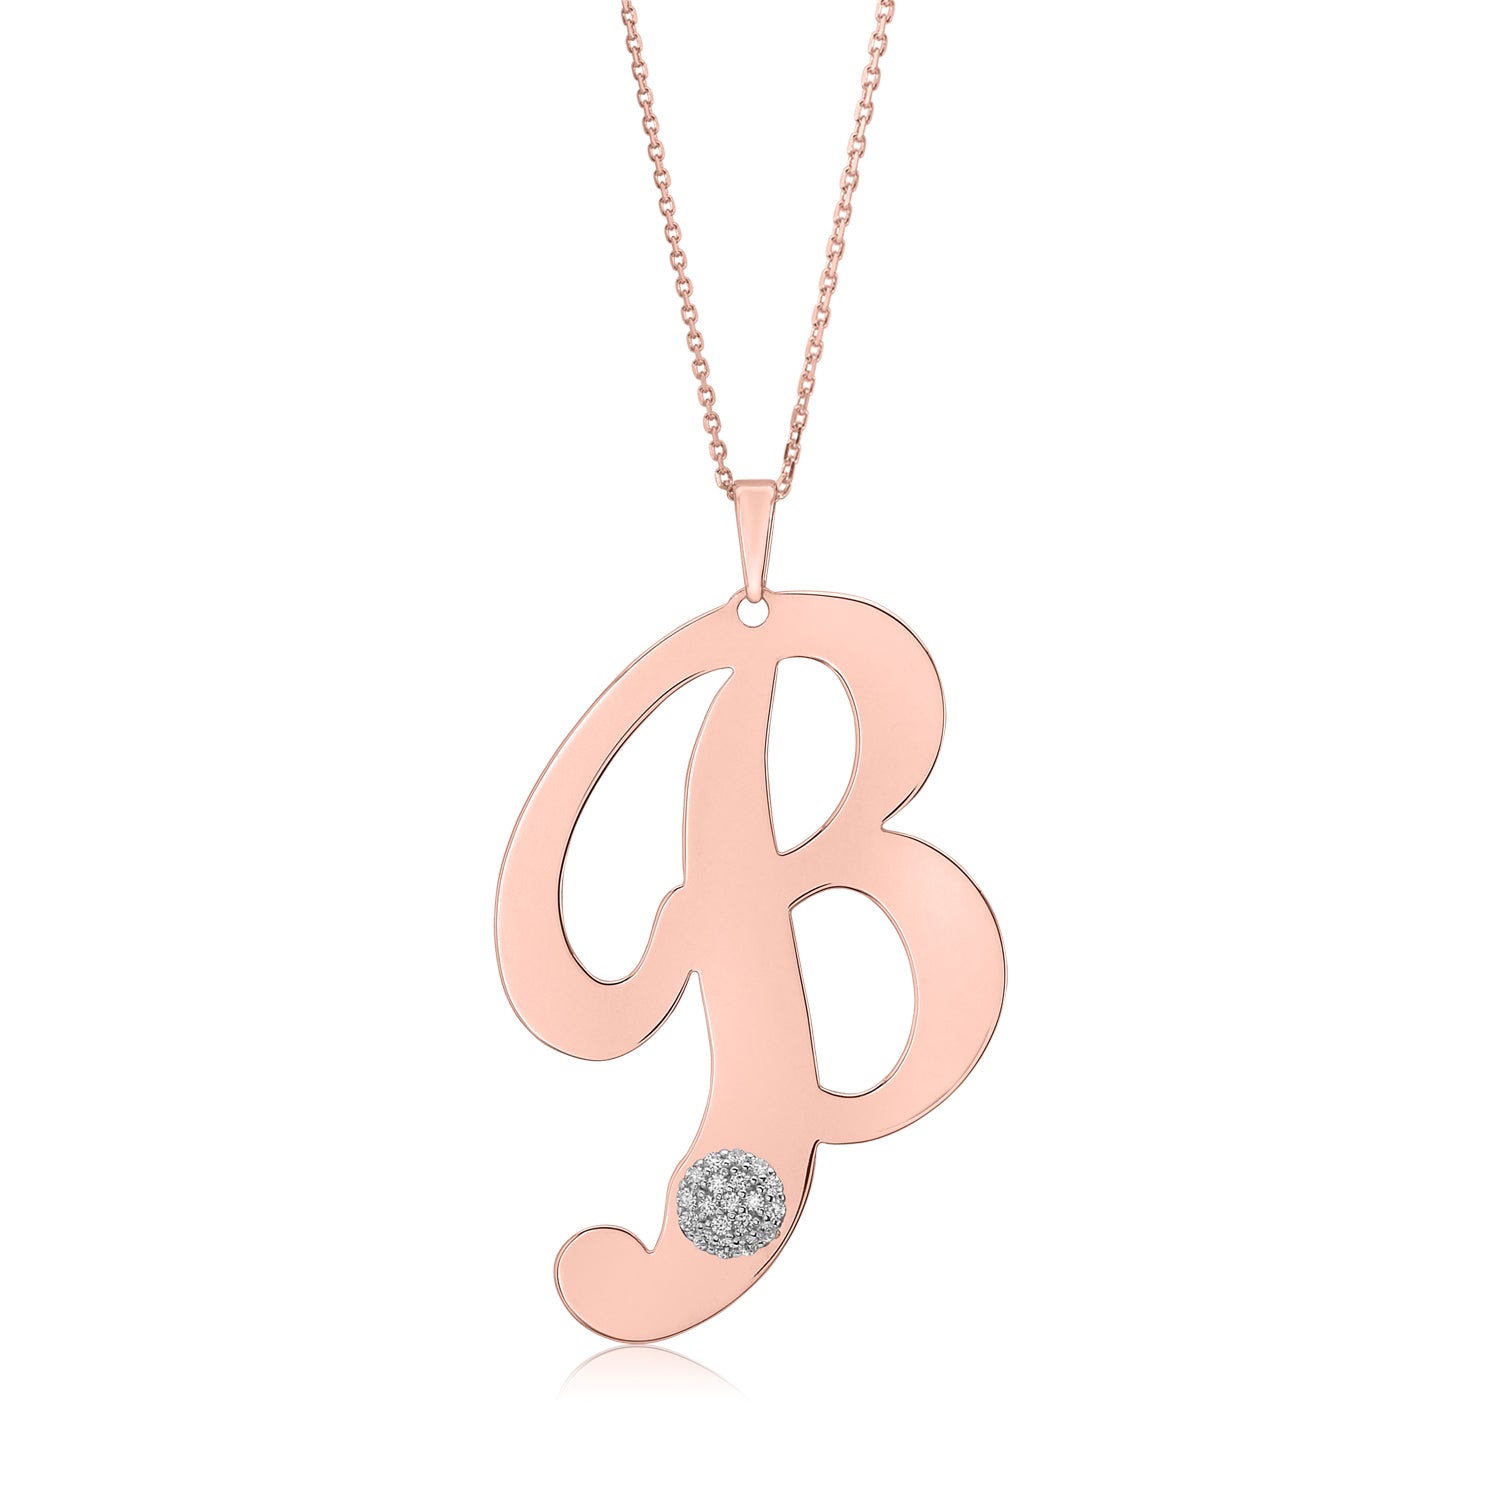 Initial Pendant in Rose Gold Plated Sterling Silver with CZ Letters on 20" Chain